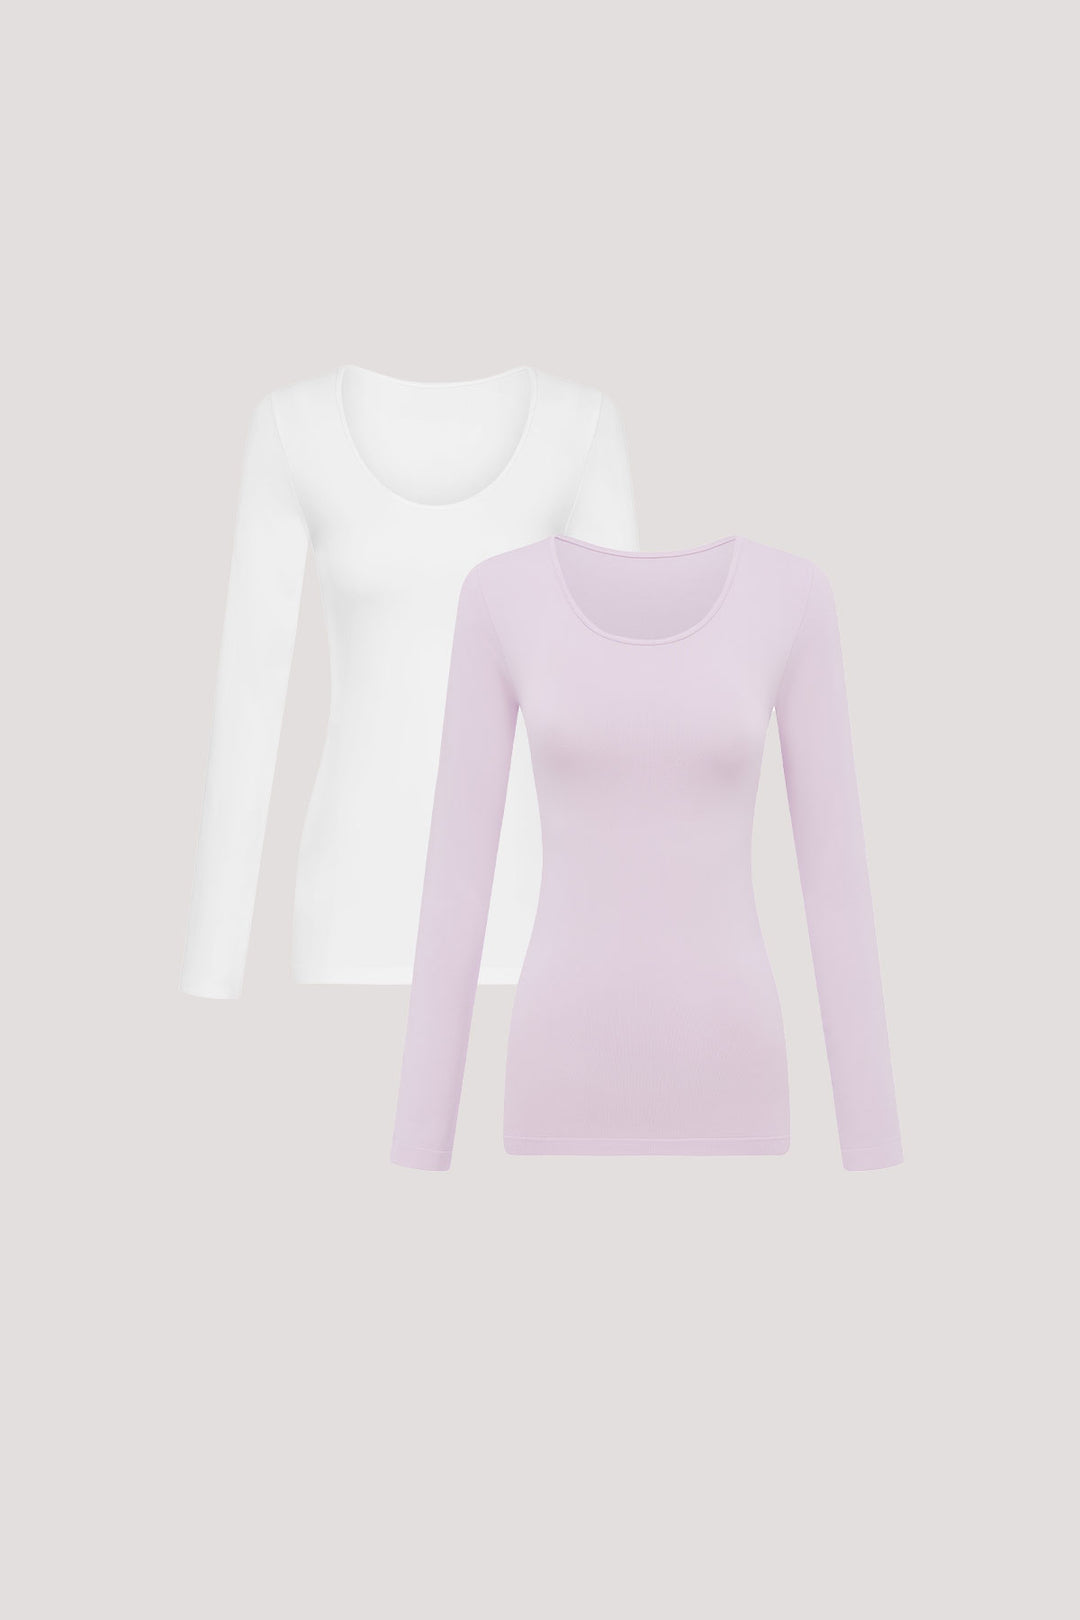 Womens breathable Modal Tencel Long Sleeve Top 2 pack | Bella Bodies Australia | White and Soft Lilac